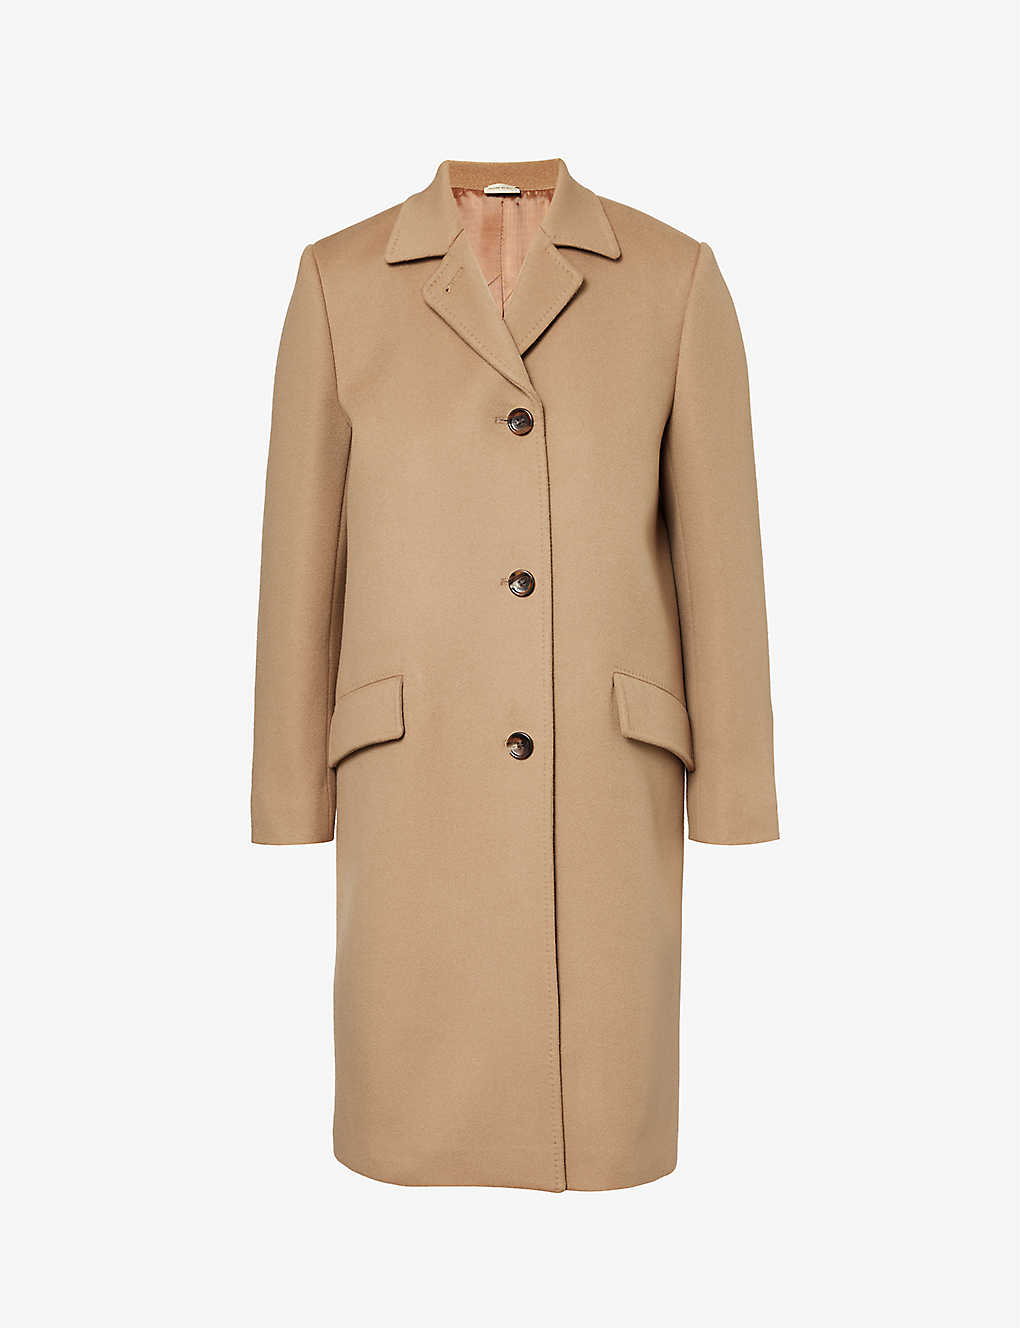 Gucci Womens Vintage Camel Single-breasted Wool Coat